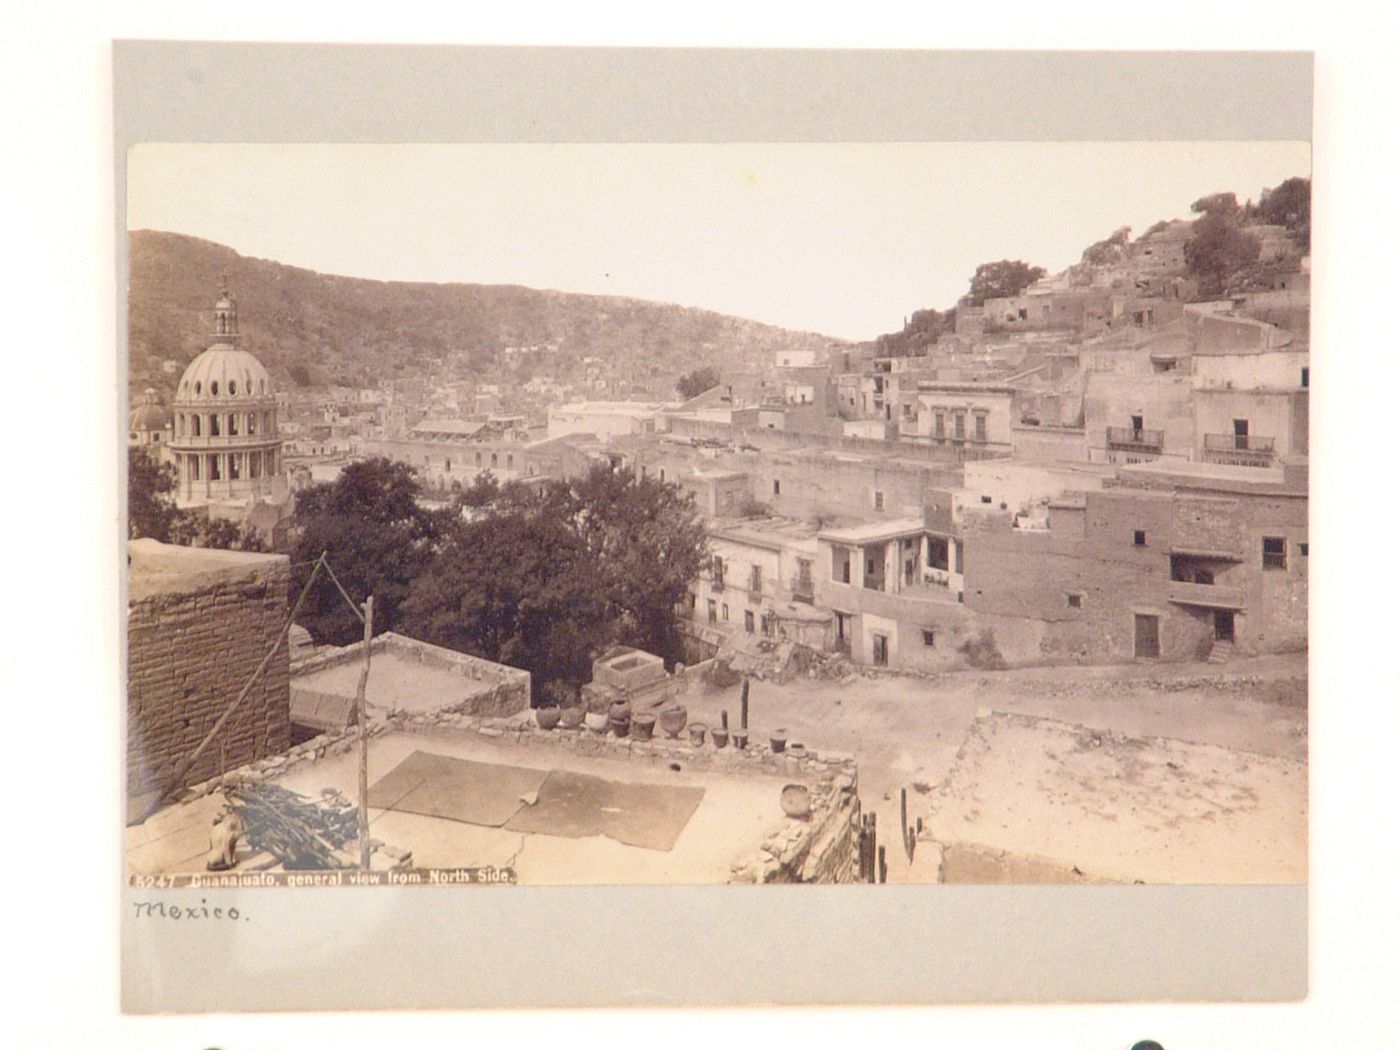 Partial view of Guanajuato taken from a roof top and showing houses, hills and the dome of a church, Mexico